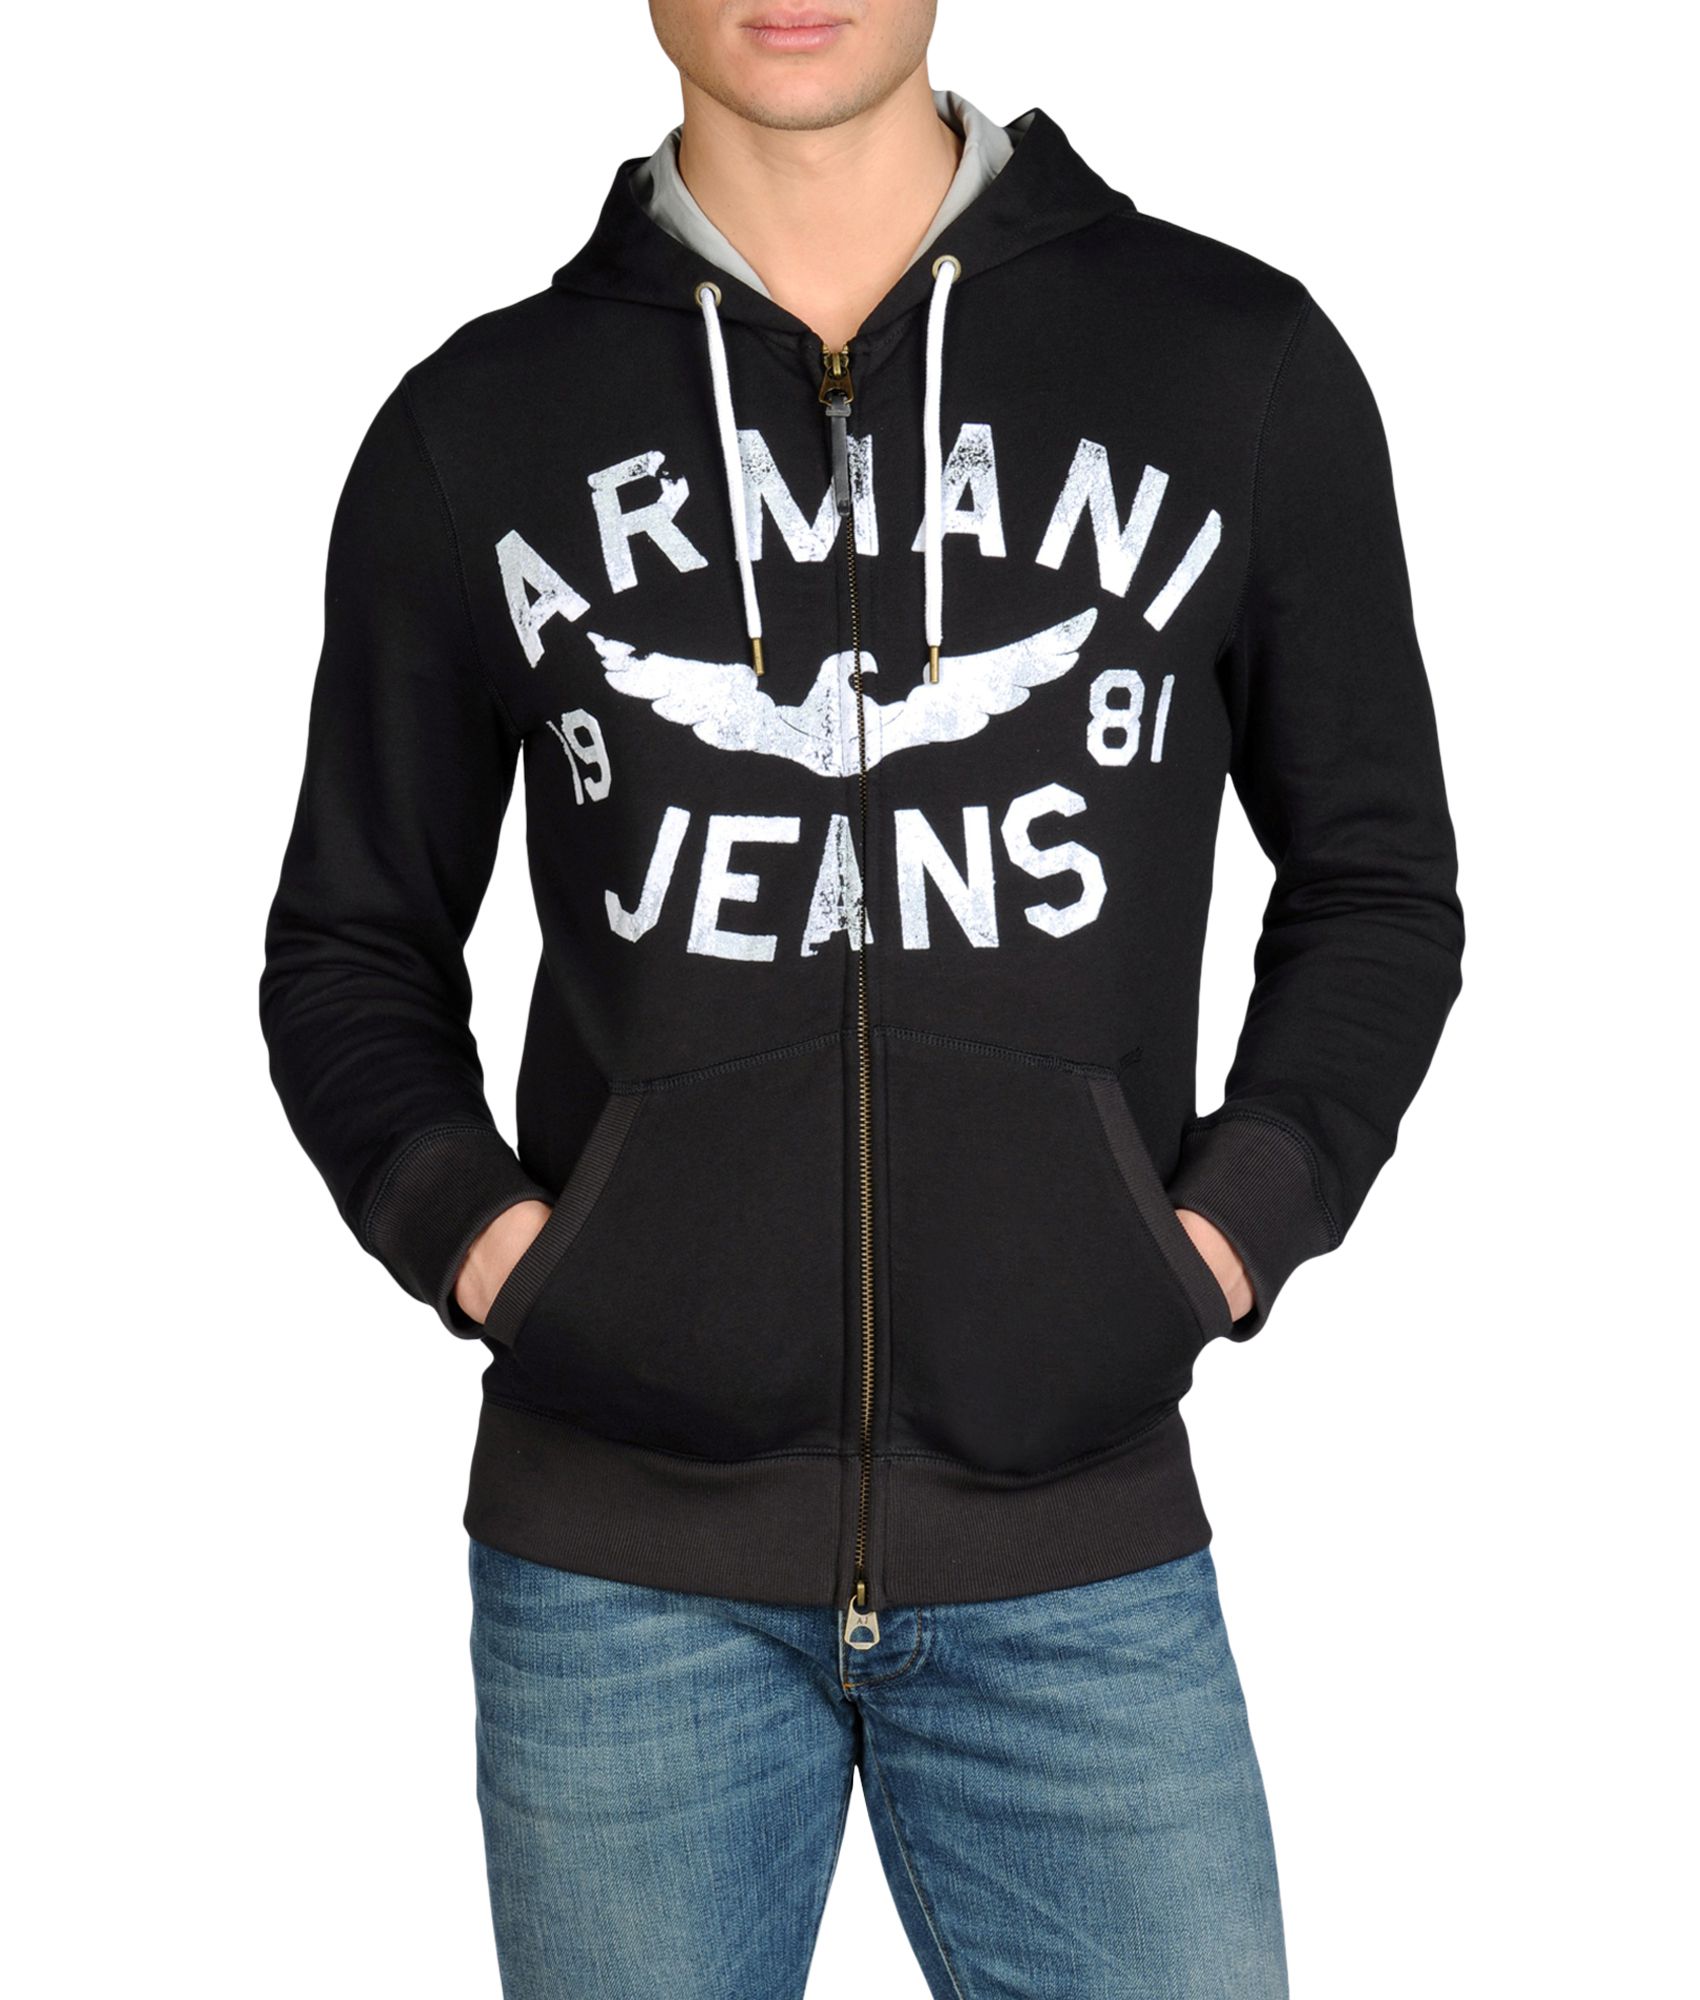 Armani Jeans Hoodie in Blue for Men - Lyst